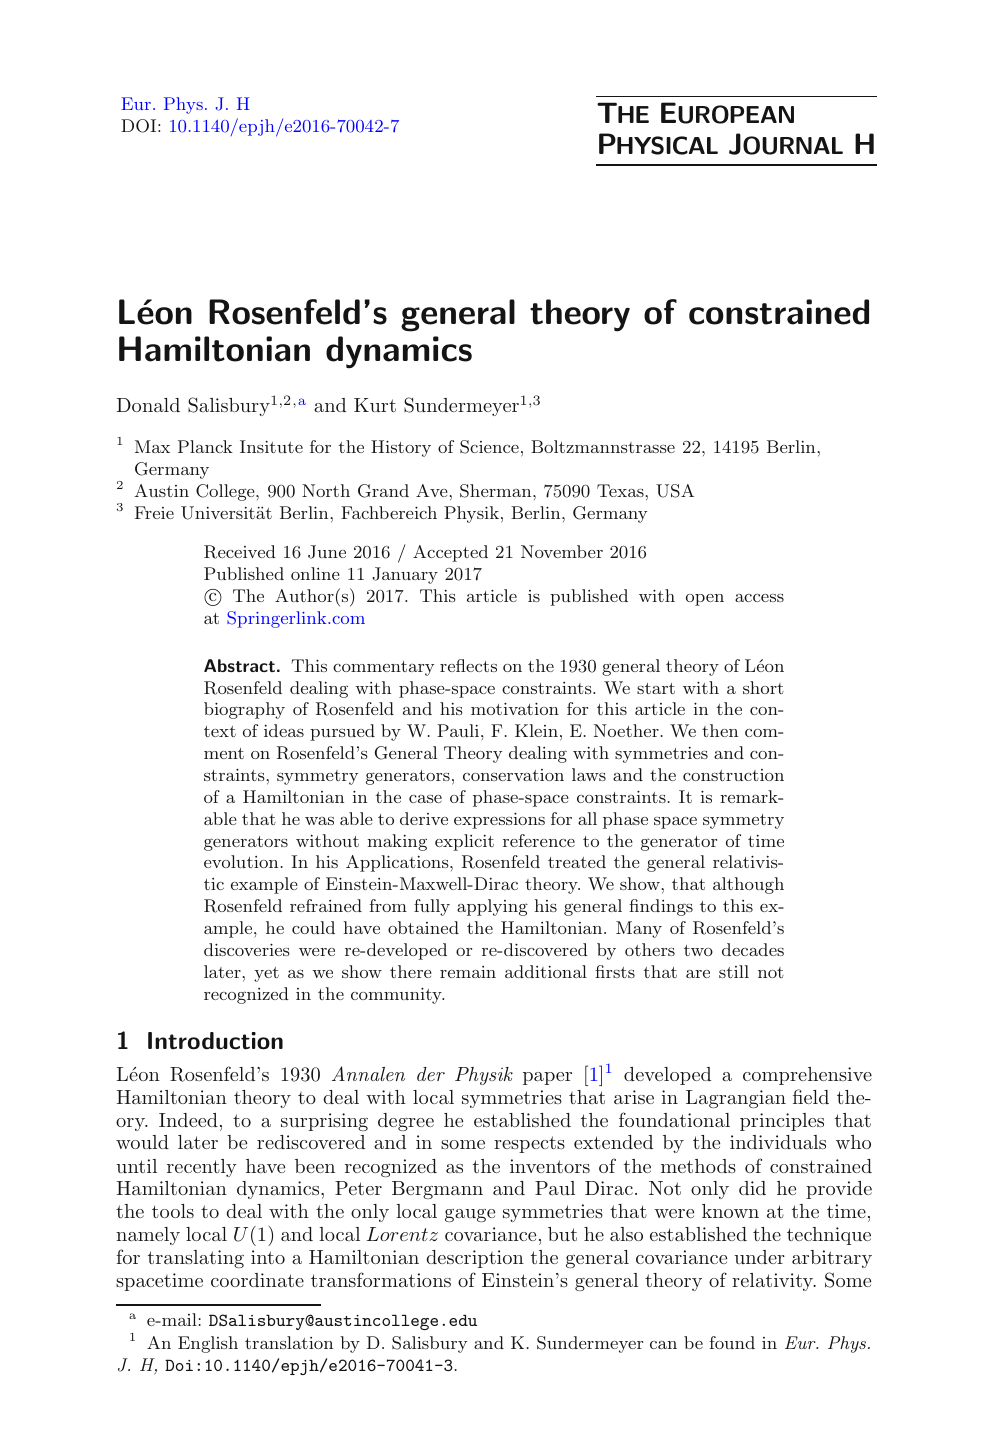 Leon Rosenfeld S General Theory Of Constrained Hamiltonian Dynamics Topic Of Research Paper In Physical Sciences Download Scholarly Article Pdf And Read For Free On Cyberleninka Open Science Hub